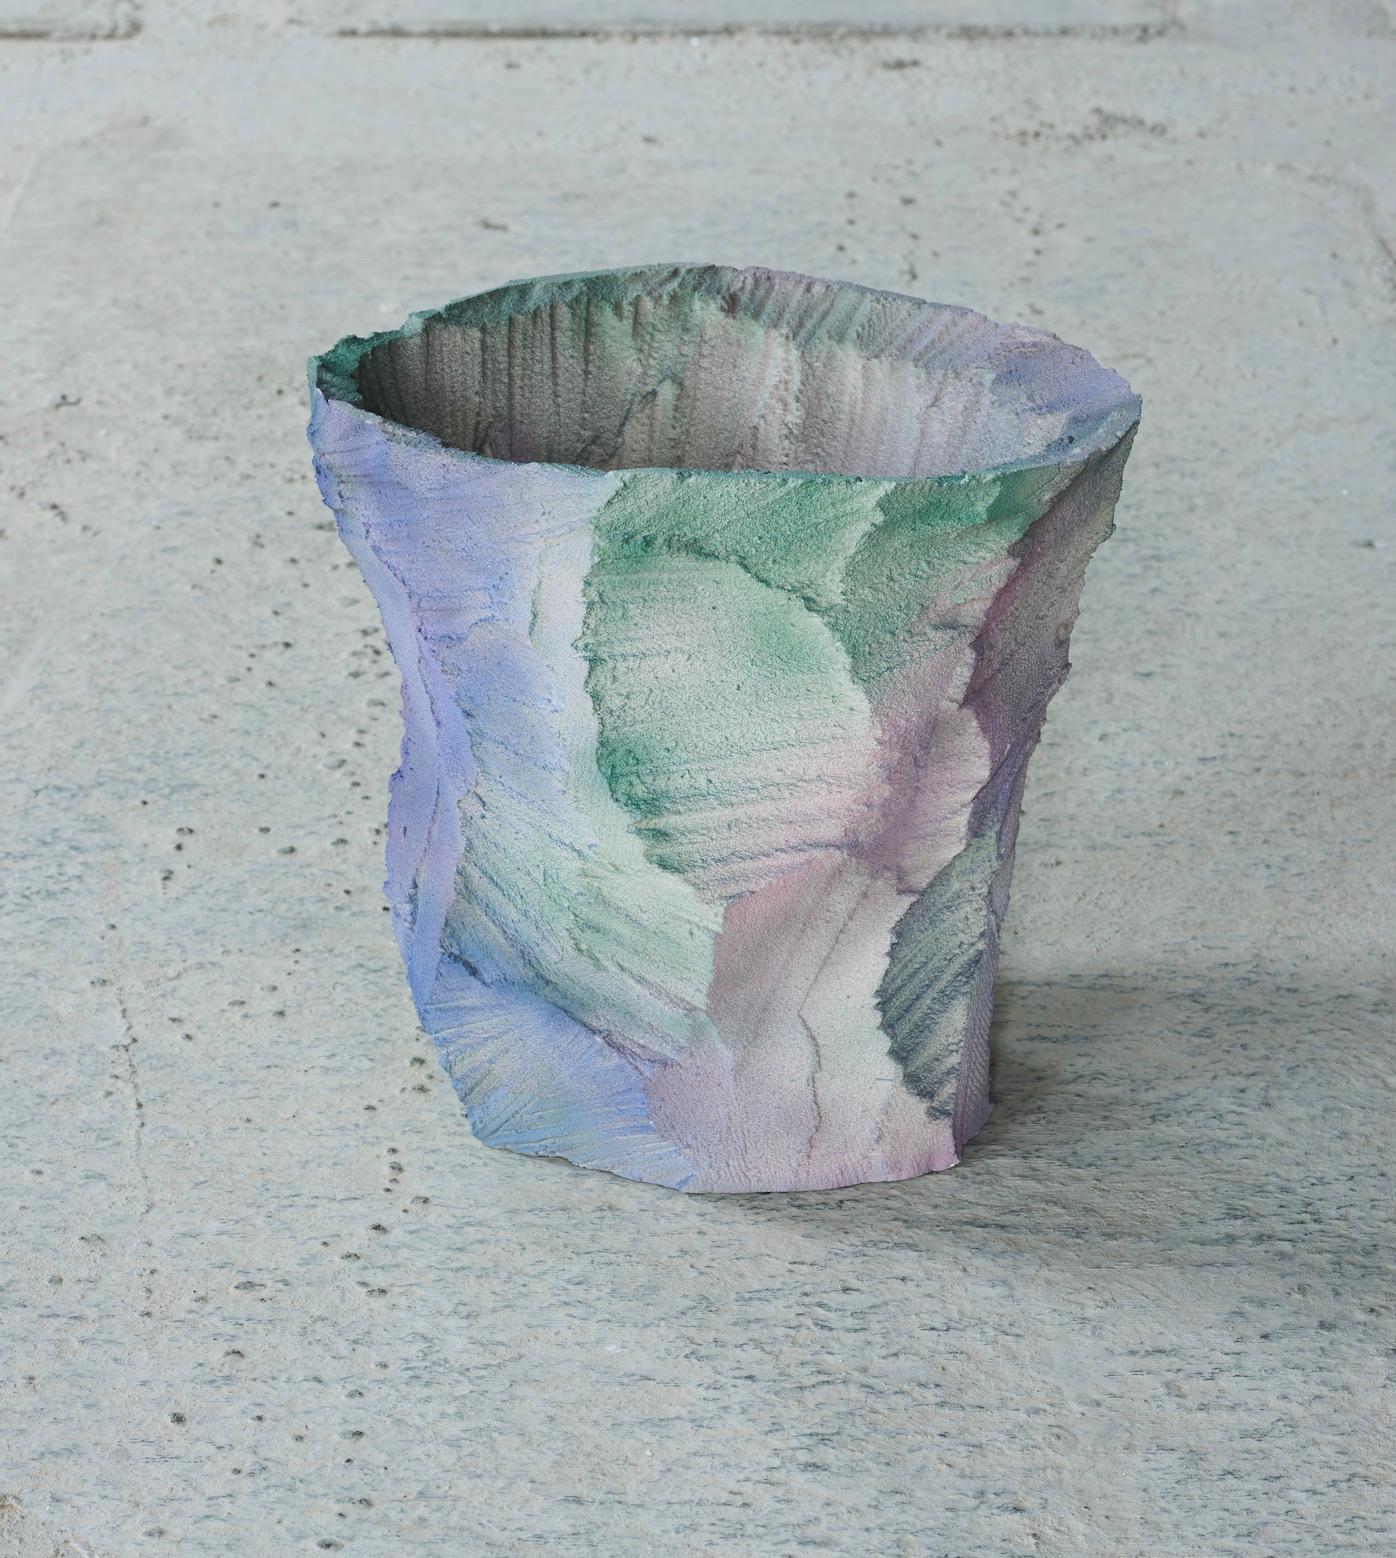 One-off a kind - Contemporary Design - Mineral Vase by Andredottir & Bobek.
Artificial Nature is a collaboration between the artist and design duo Josephine Andredottir and Emilie Bobek.

They have in this collection imitated landscape with